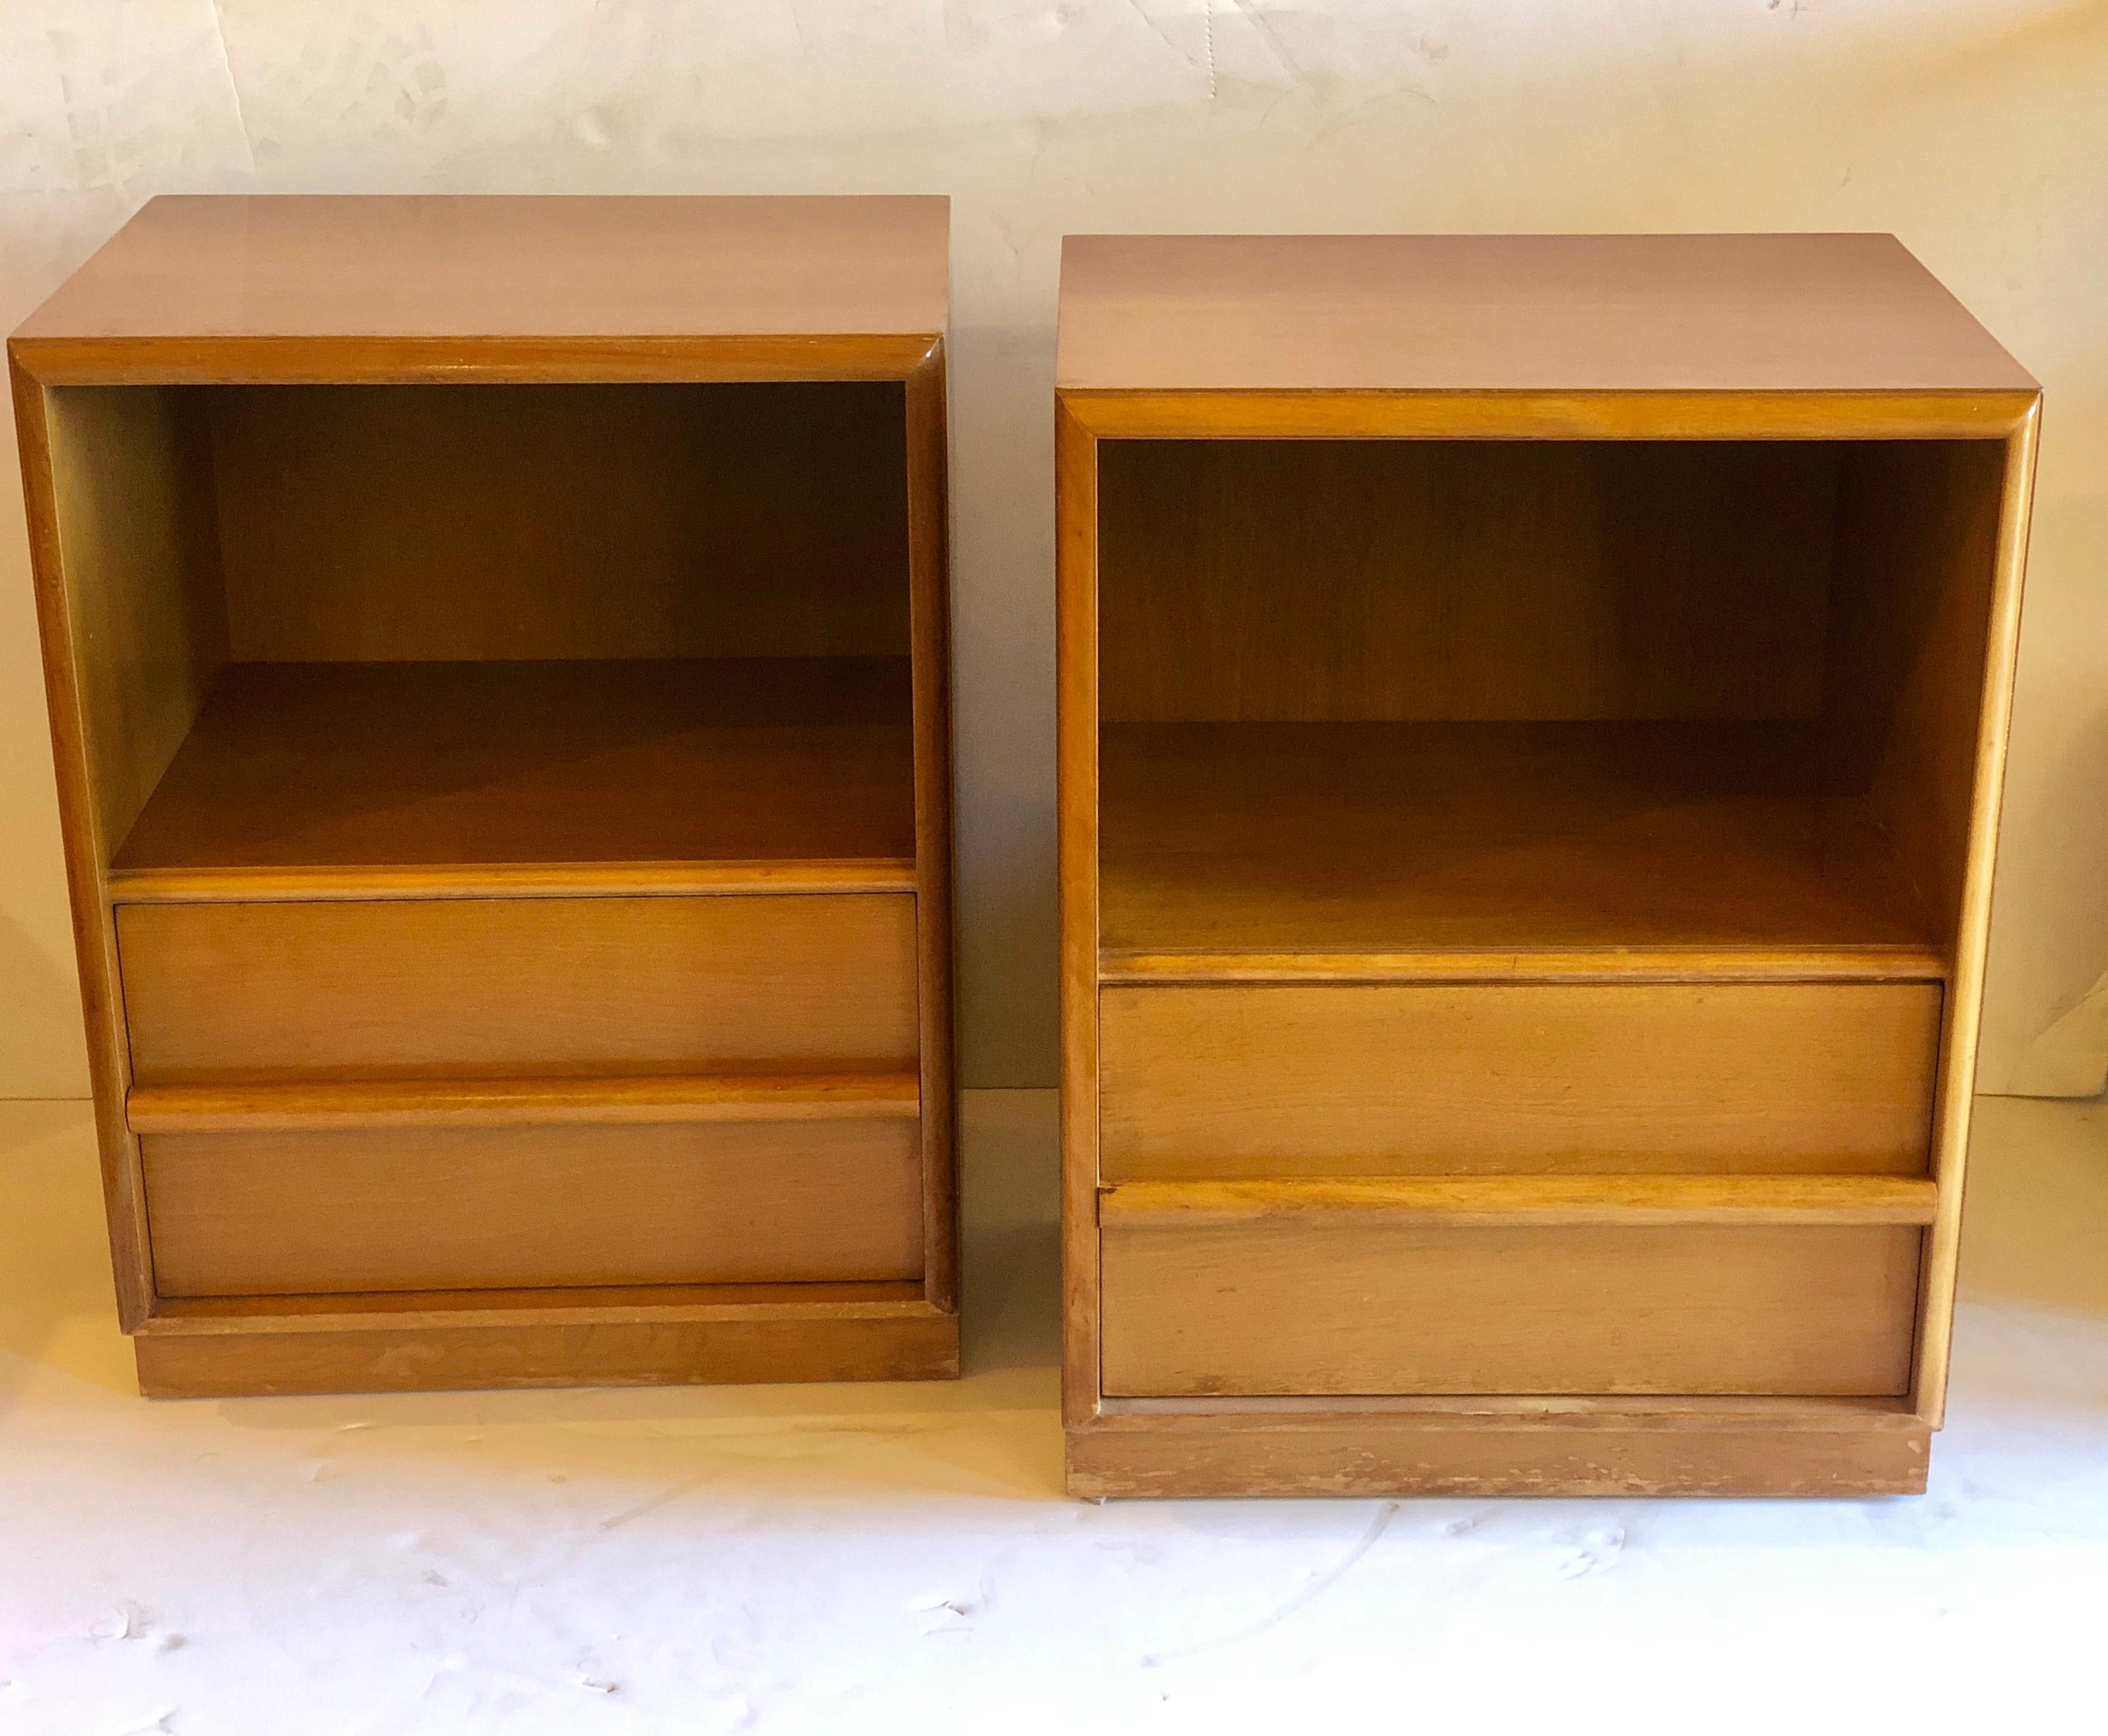 Nice pair of T.H. Robsjohn-Gibbings for Widdicomb nightstands or end tables with horizontal dowel handle and single drawer on bottom. This pair retain their original light walnut finish which does show minor wear. These set its very clean and comes